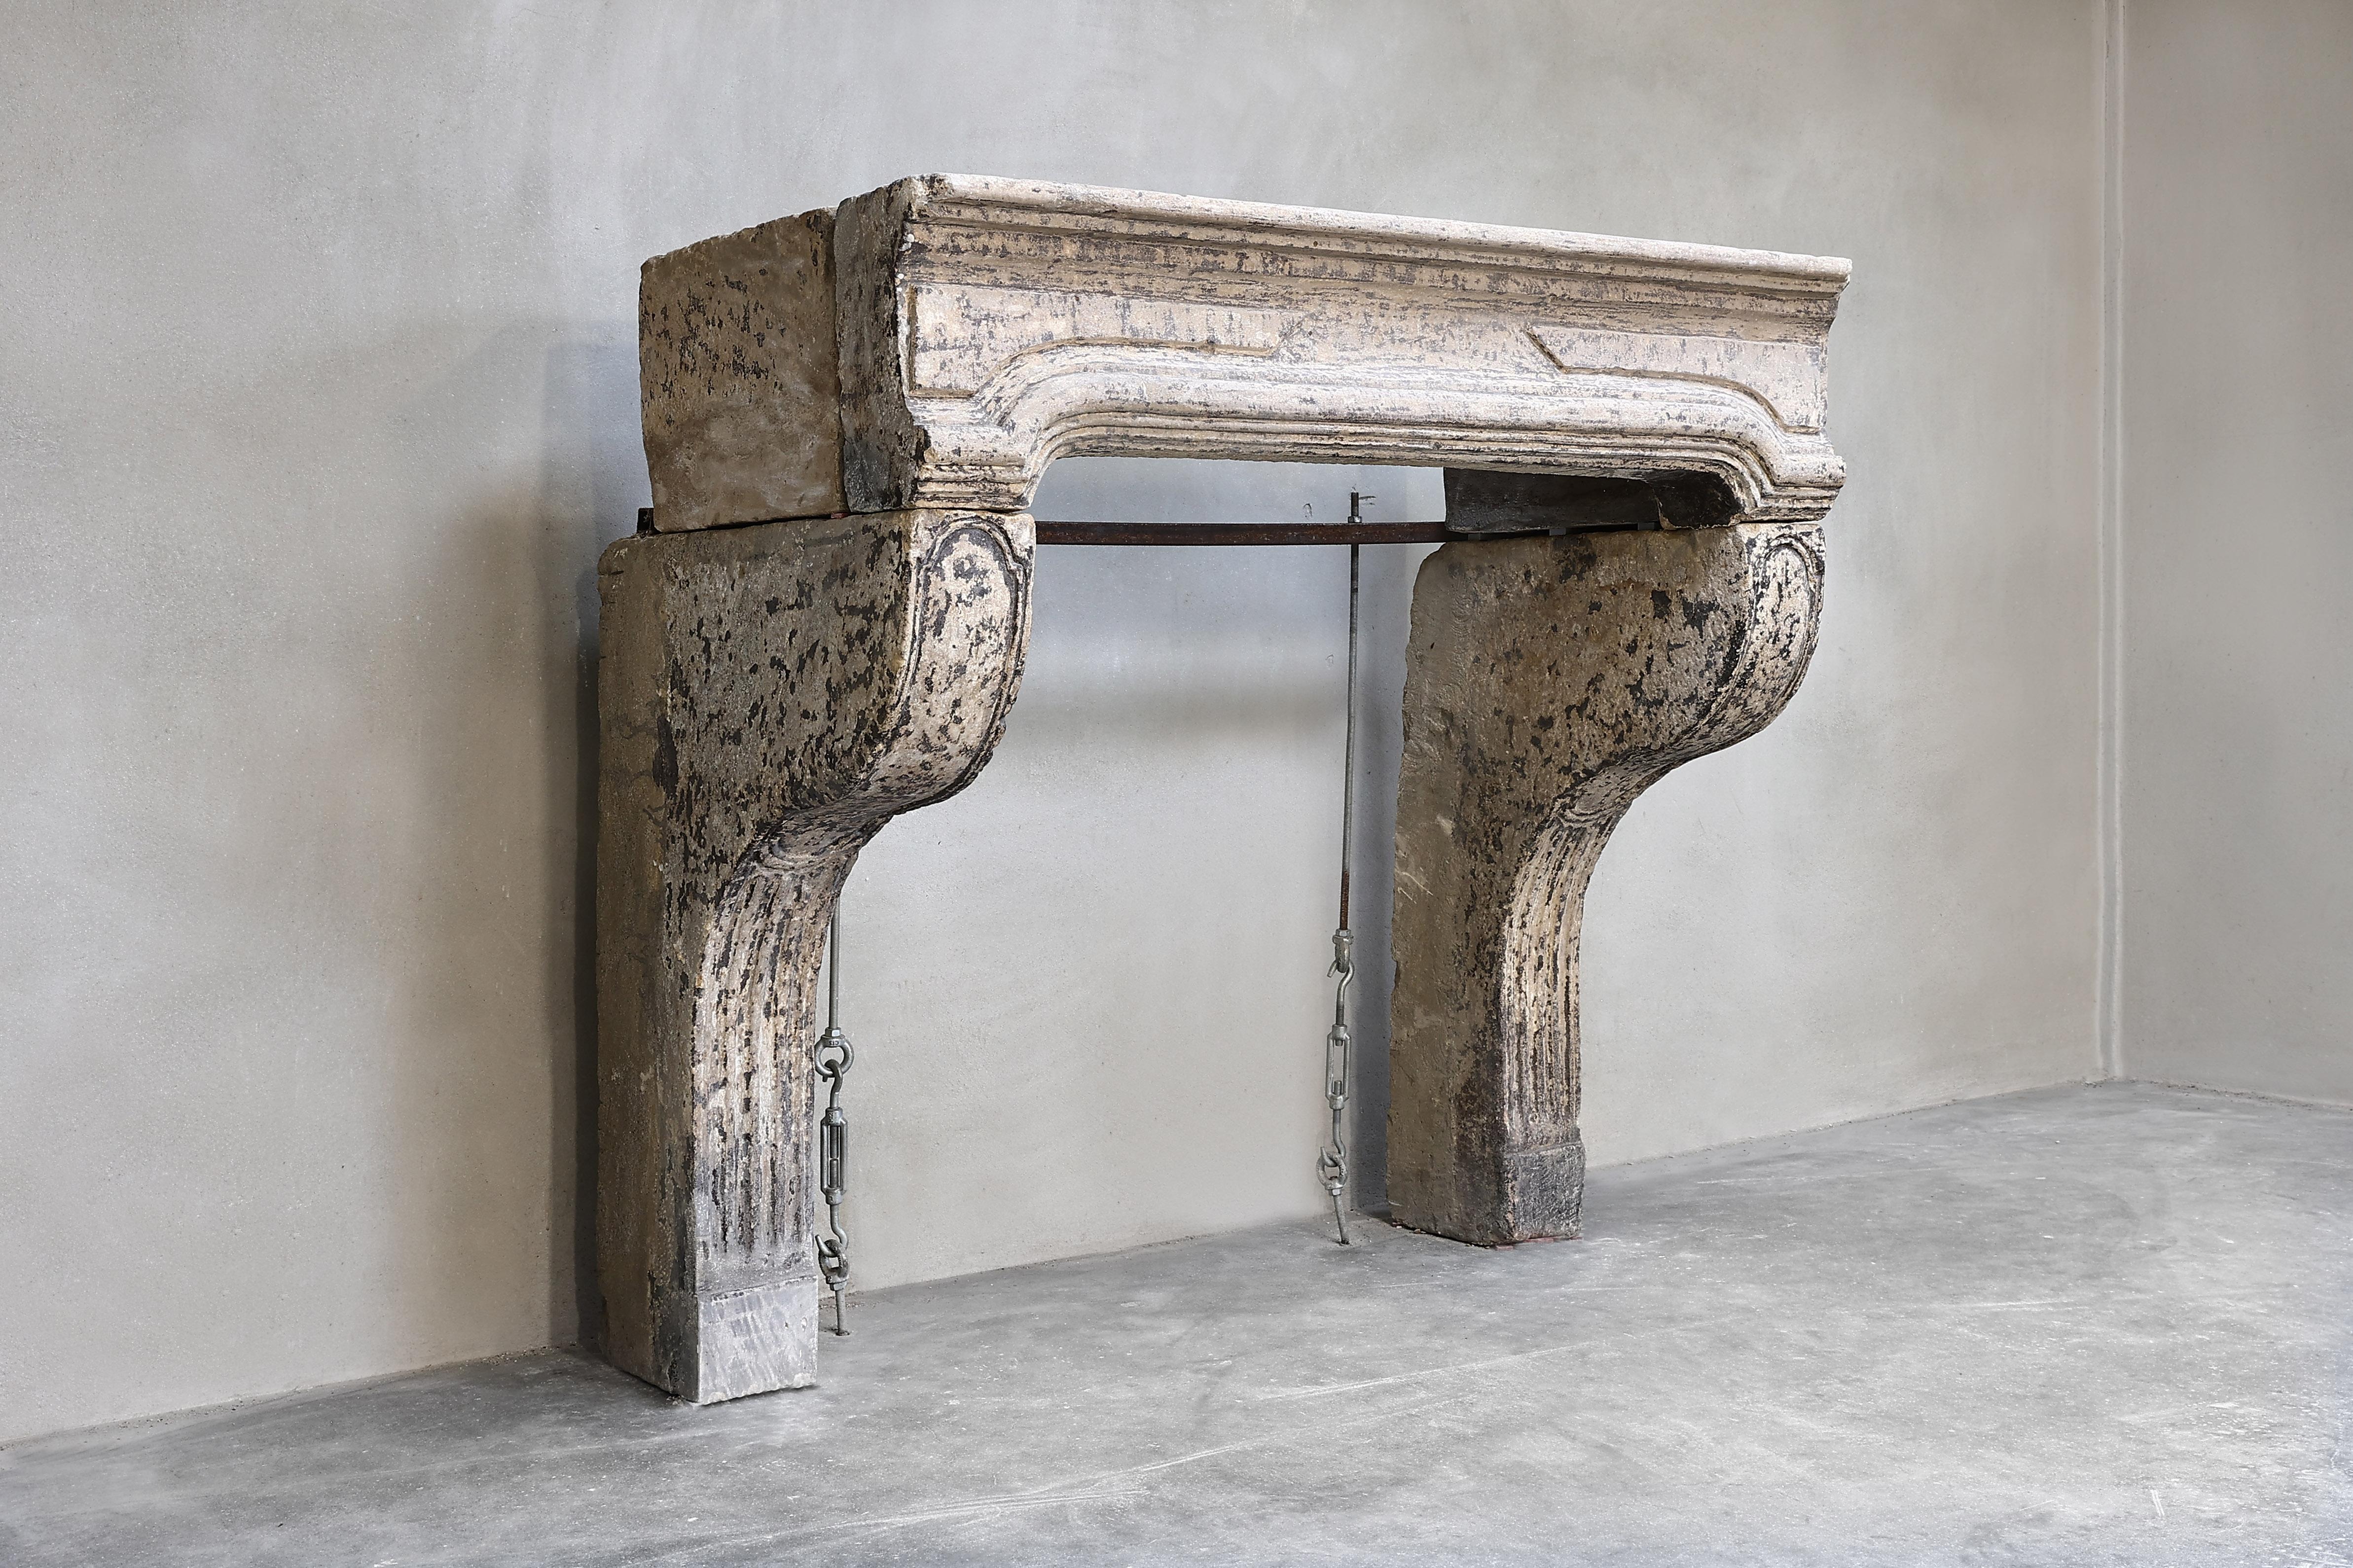 Beautiful antique fireplace in French limestone in the style of Louis XIV from the 19th century. An very authentic fireplace with beautiful lines and hand-cutouts. The patina provides an authentic look and feel! A nice compact fireplace with history!